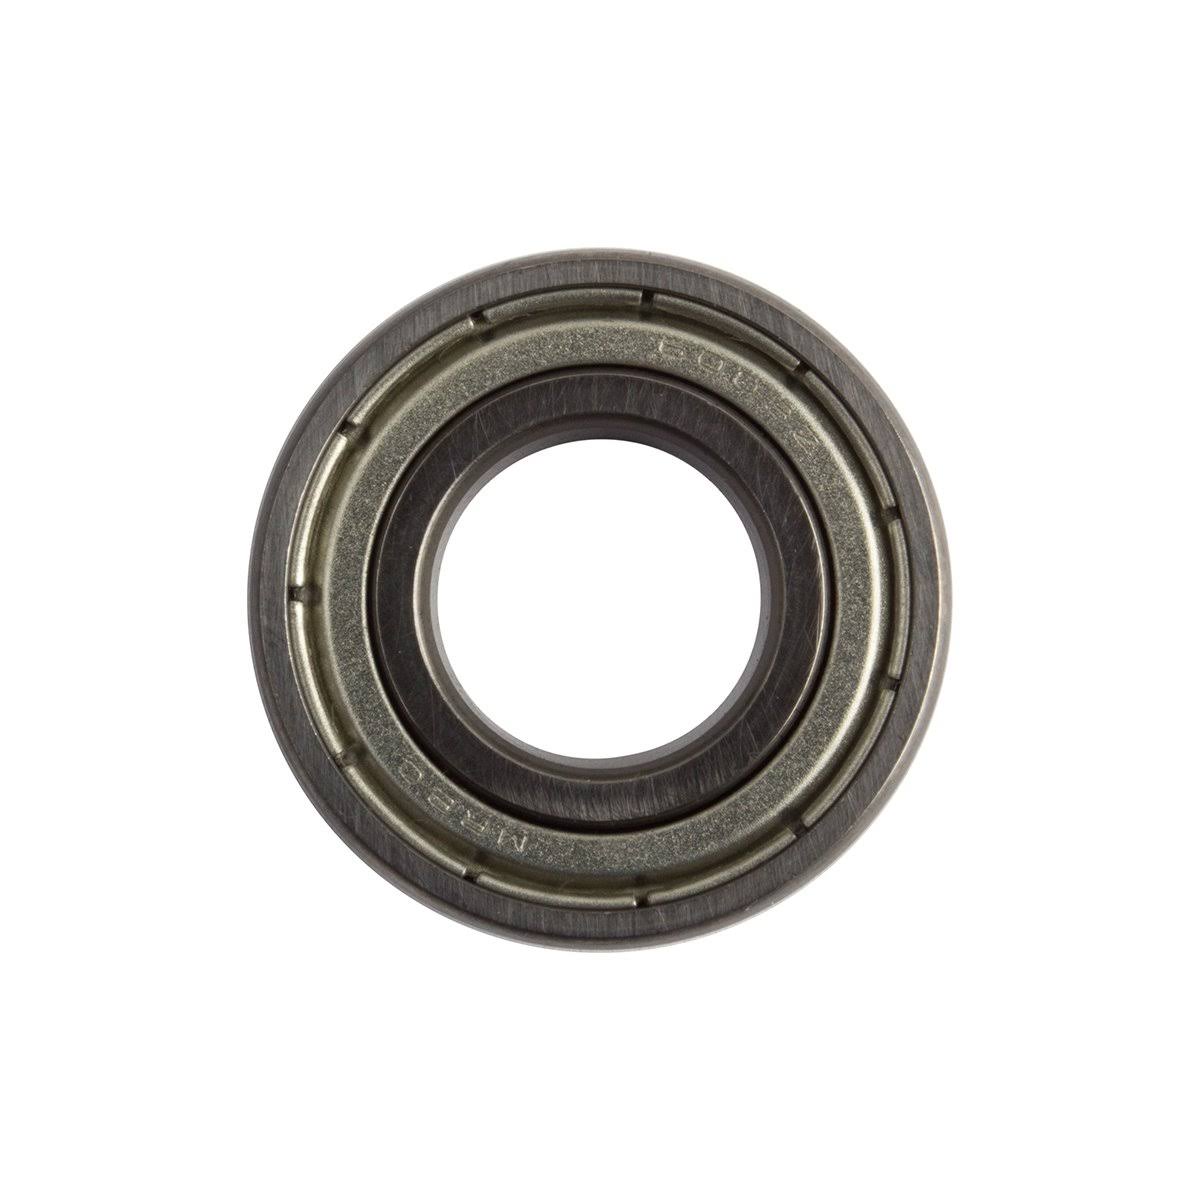 Sun BICYCLES 19125 Trike Replacement Bearing for 17 mm Axle - Baja 17